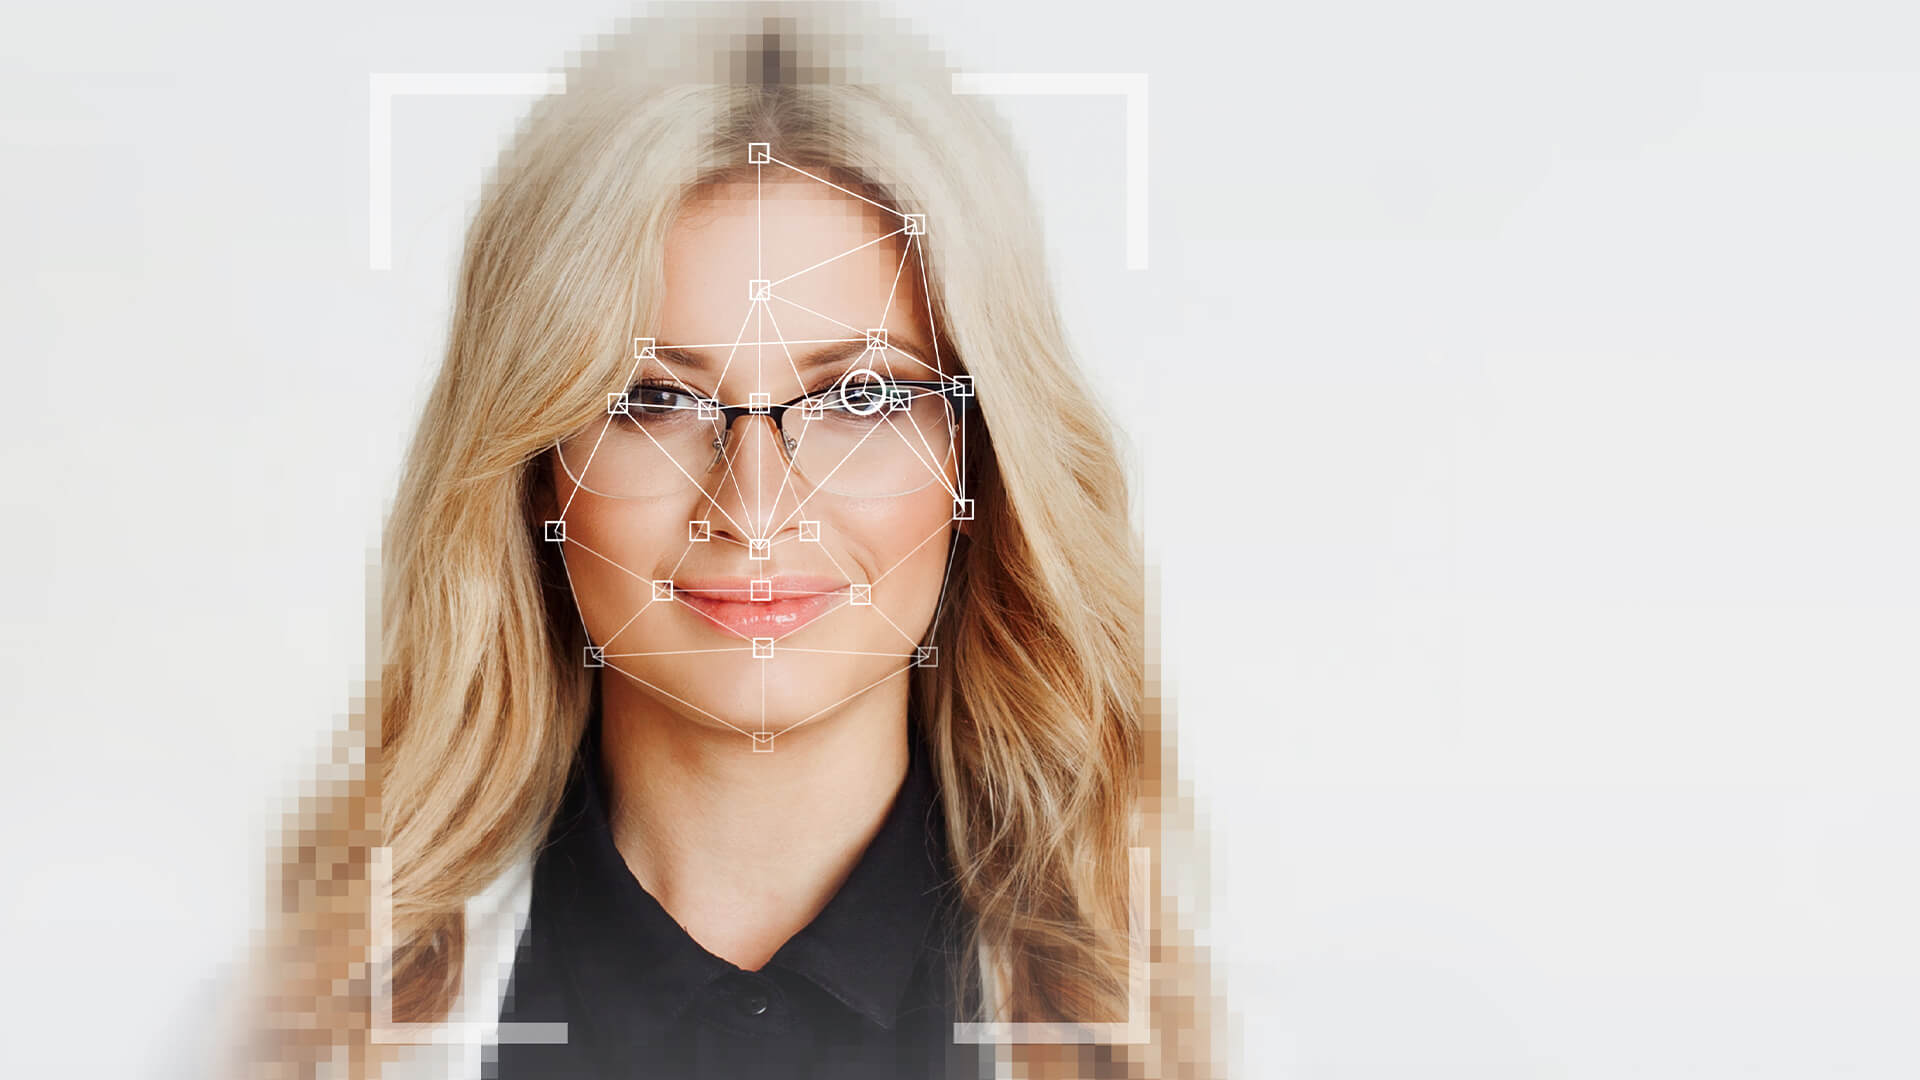 Blonde woman with glasses with tech style frame and lines mapping out her face